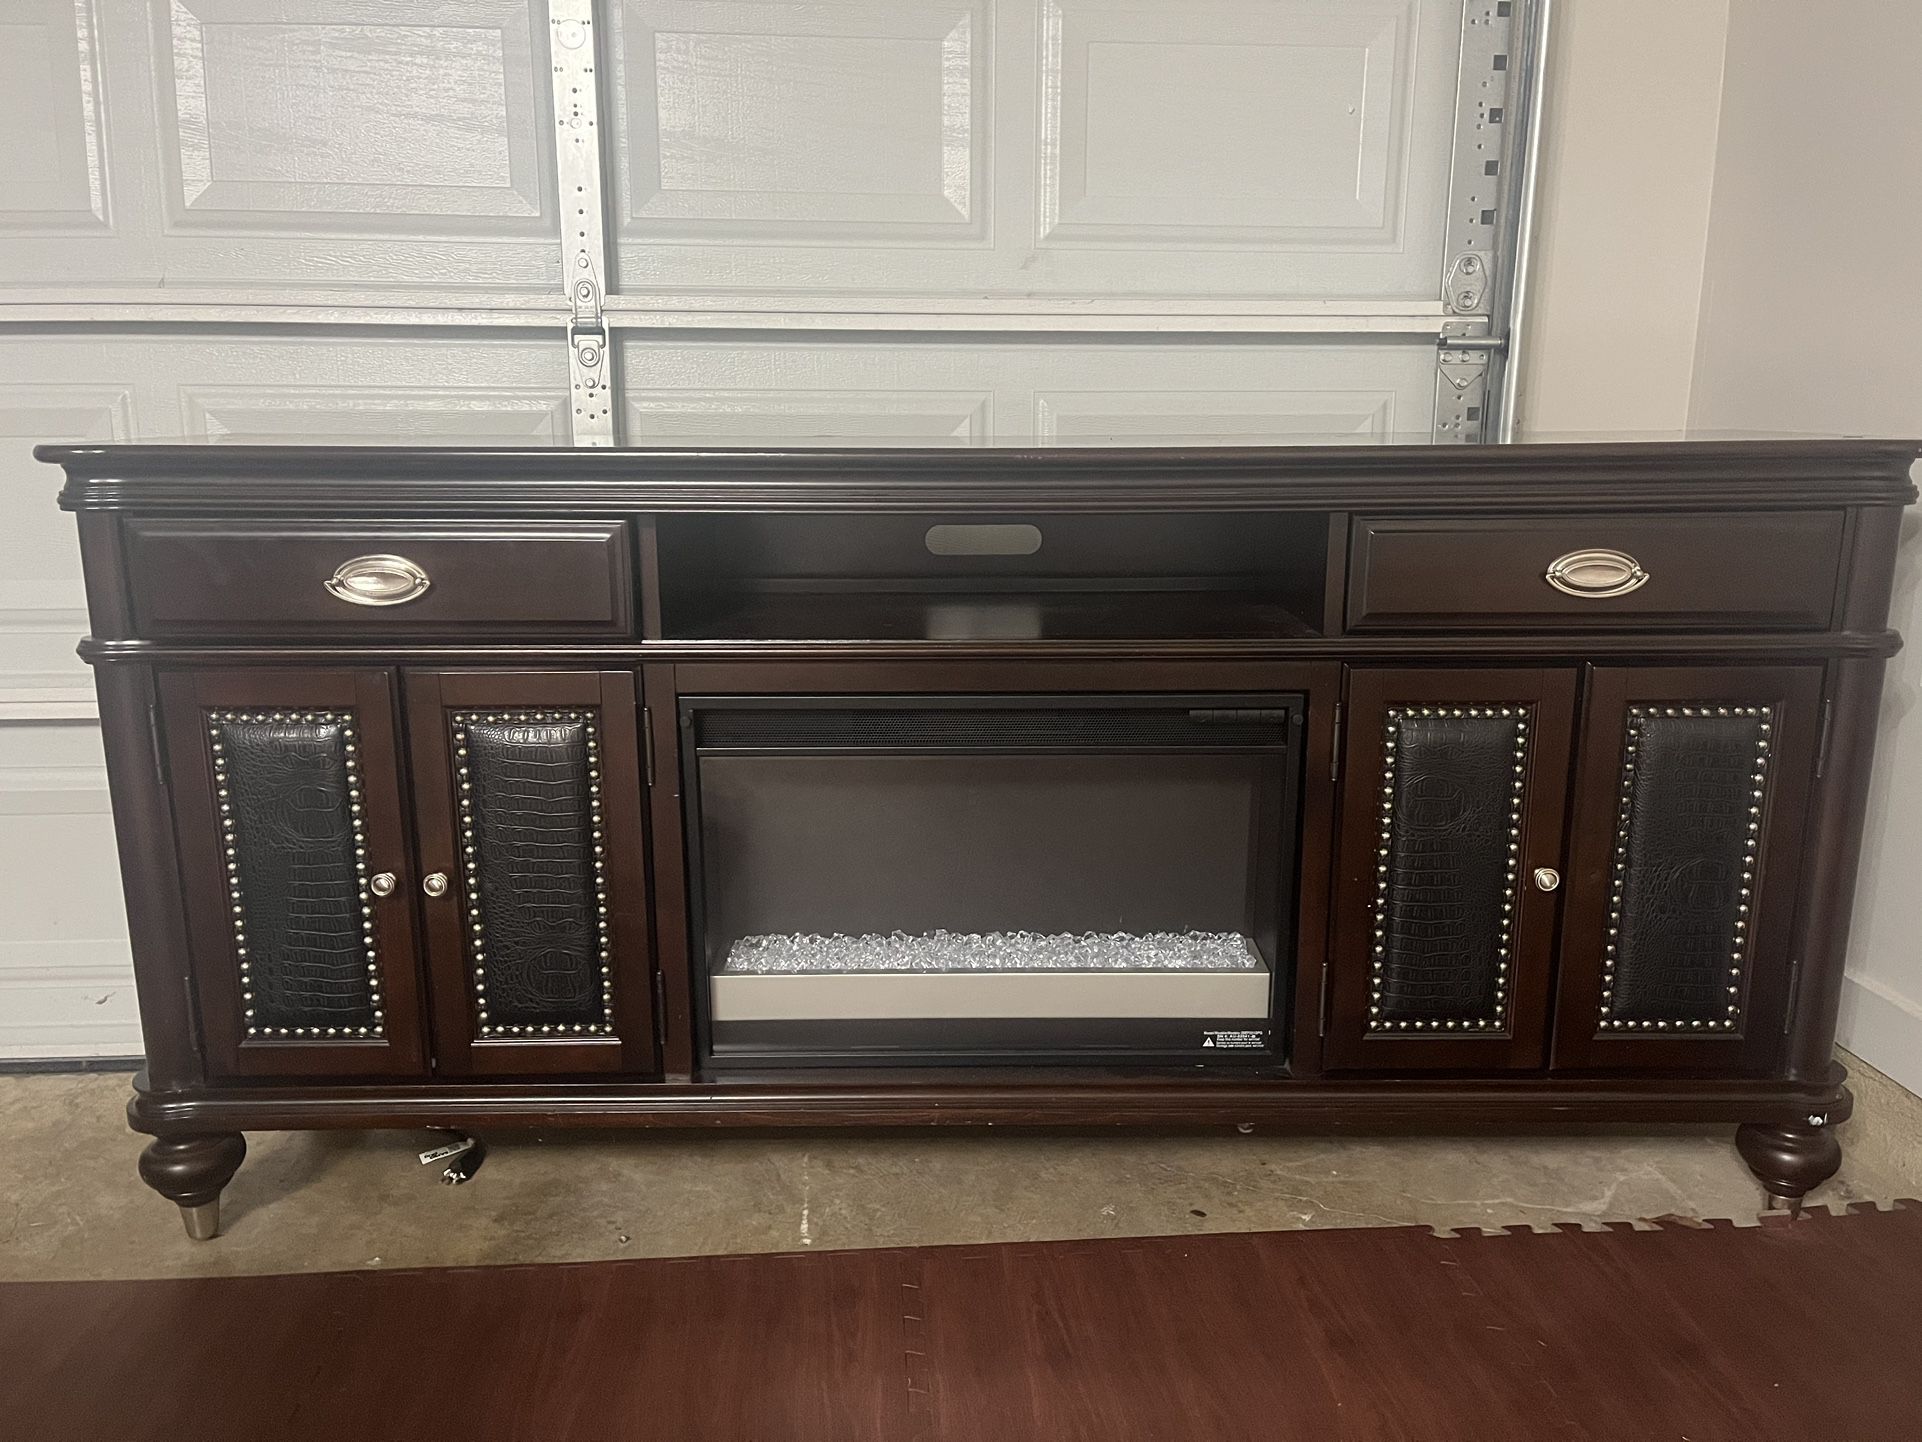 TV Stand With Electric Fireplace